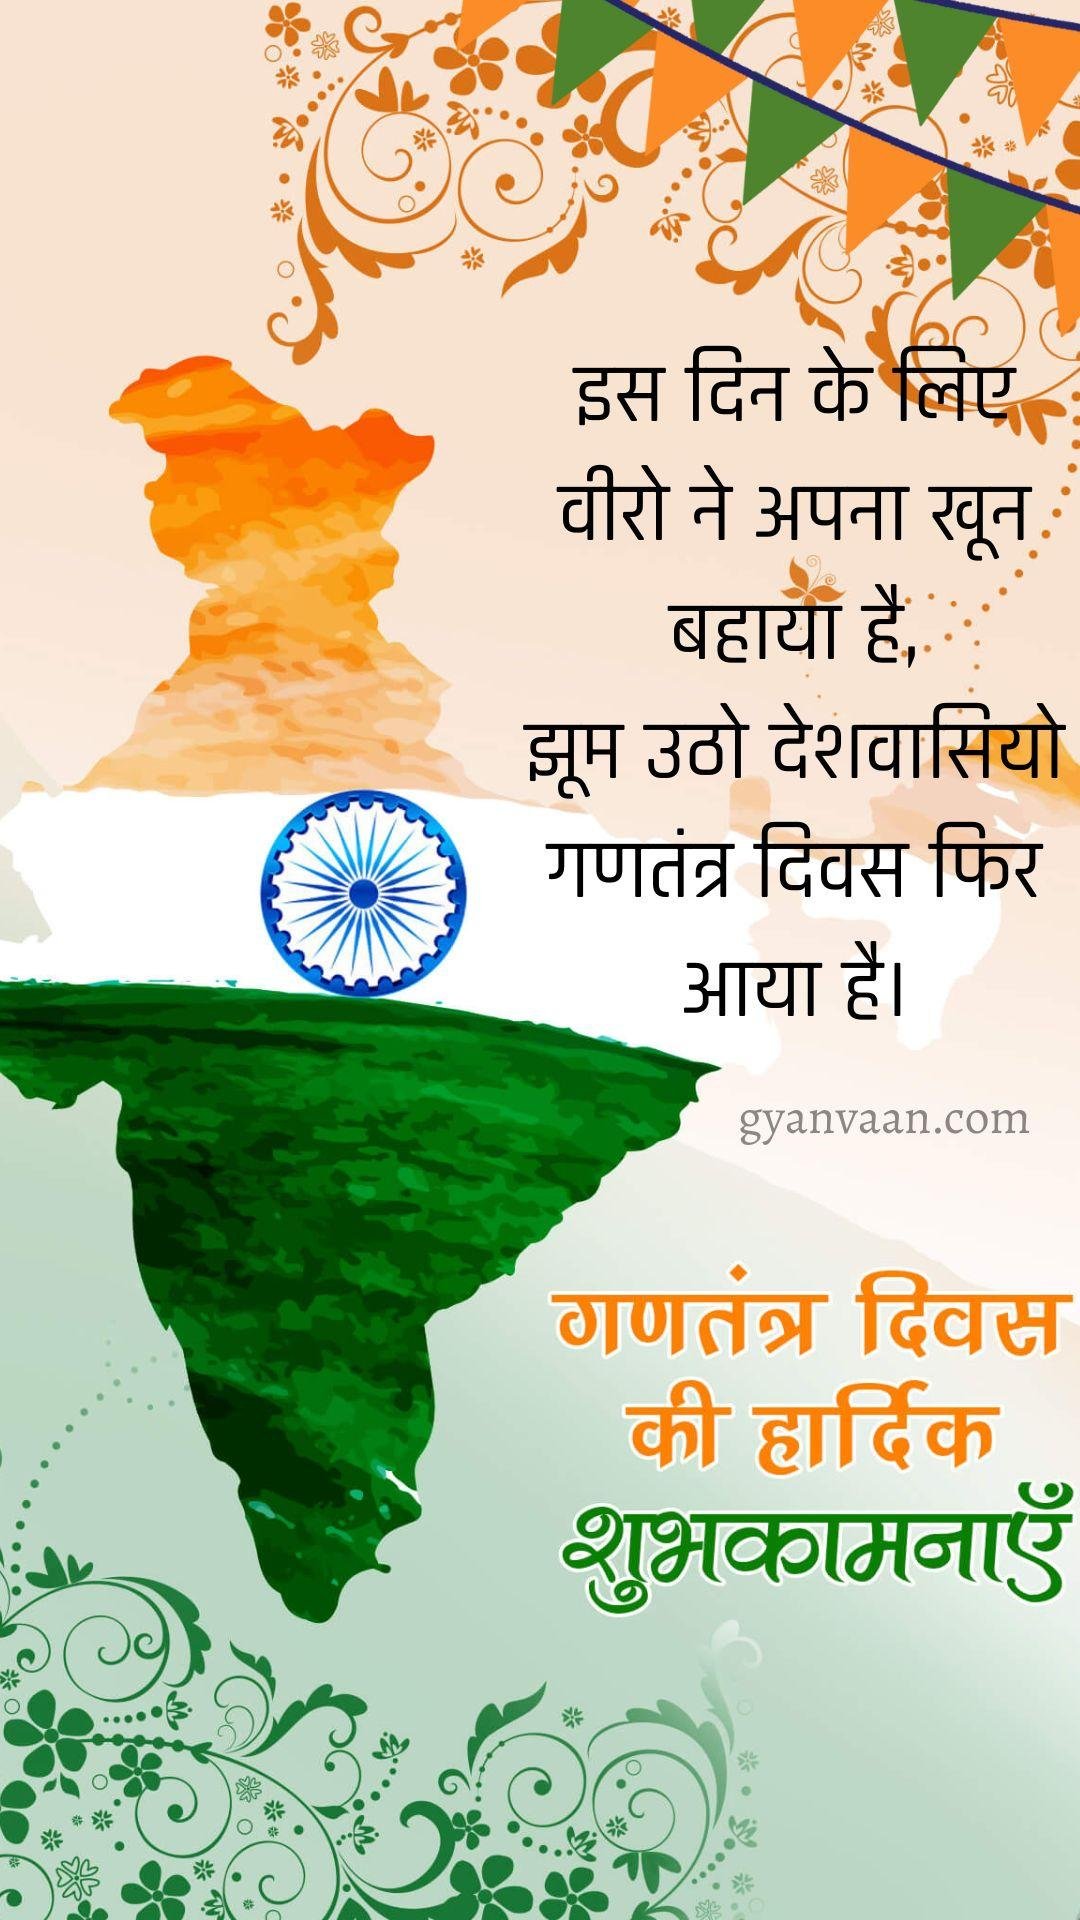 Republic Day Quotes In Hindi With Status And Shayari 8 - Republic Day Quotes In Hindi